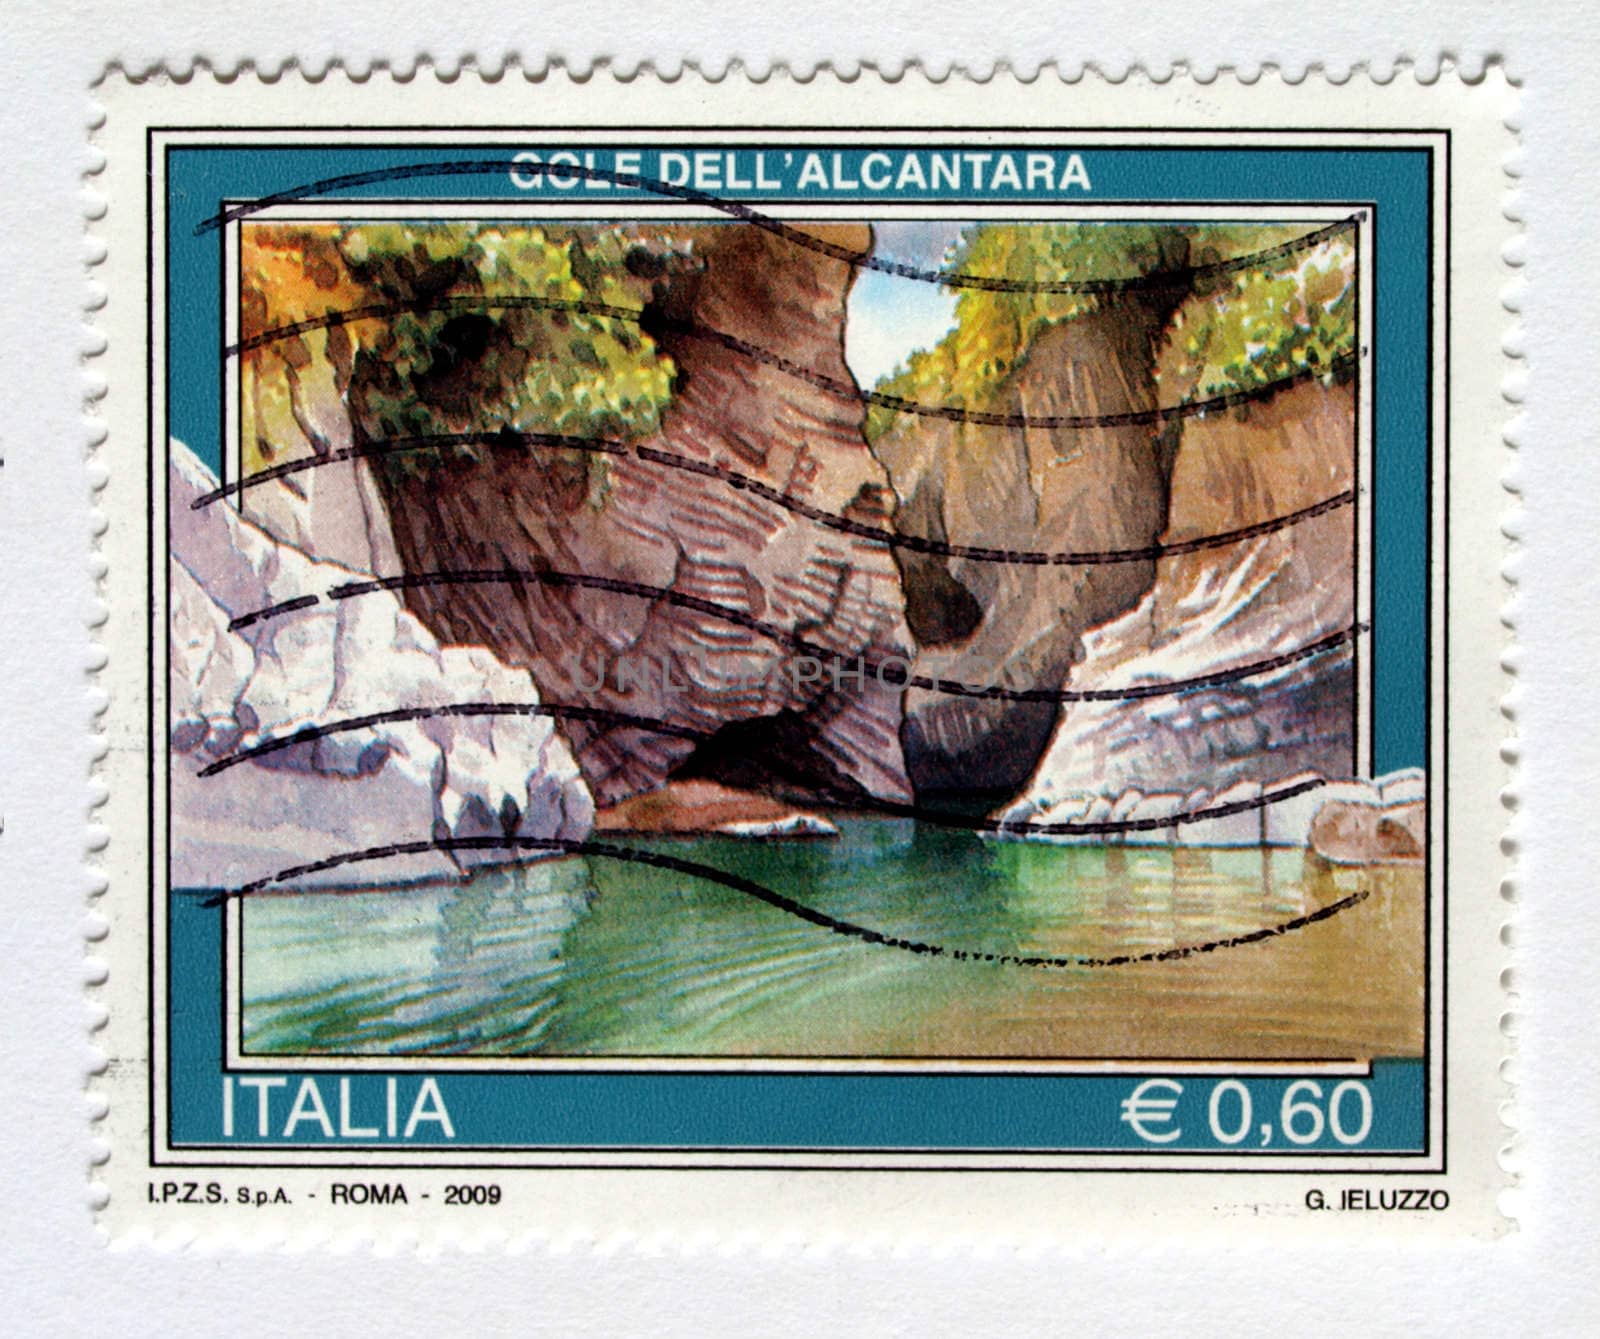 Italian stamp with postage meter from Italy